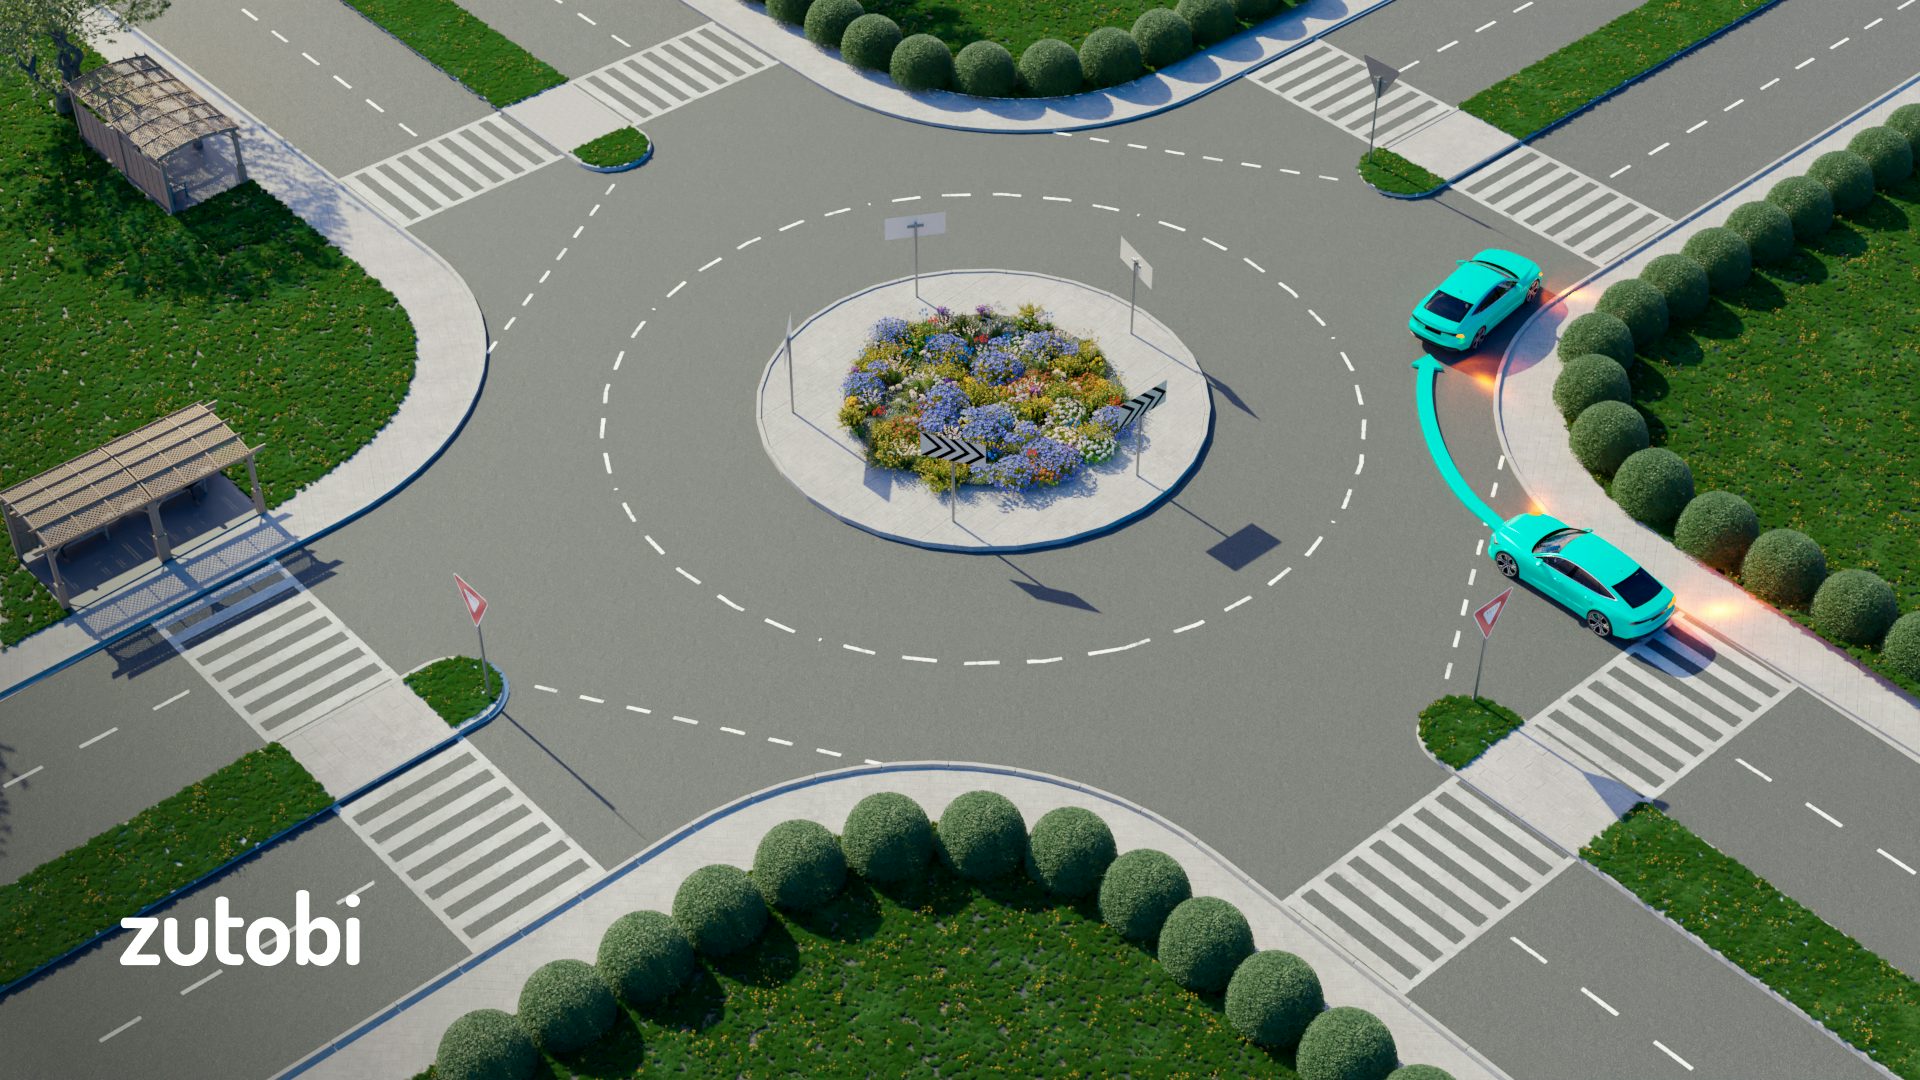 Turning Right in a Roundabout